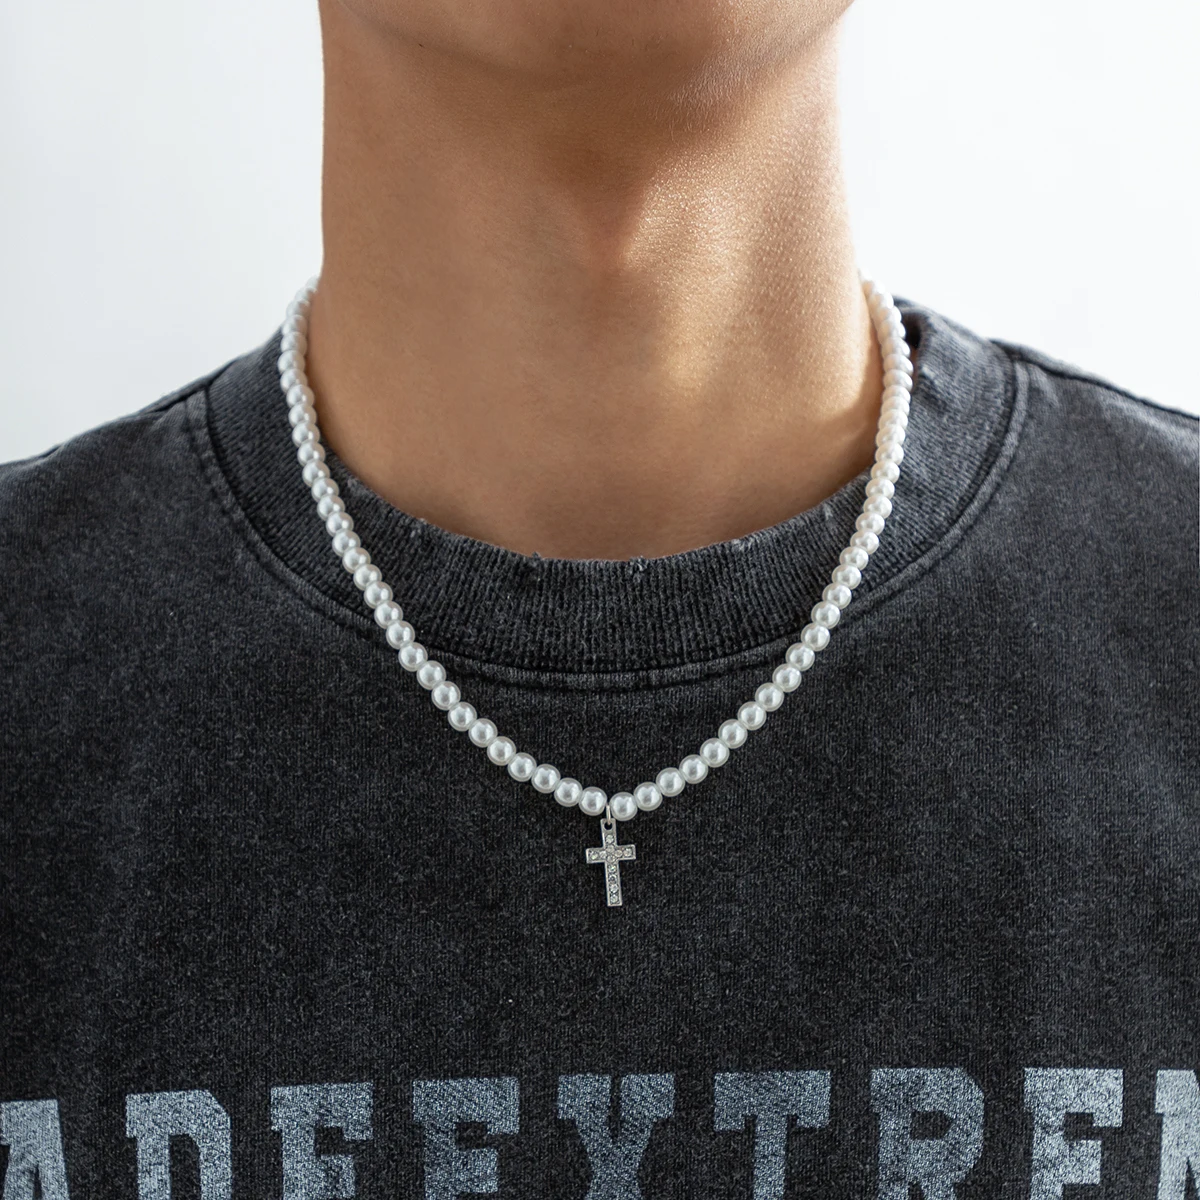 

IngeSight.Z Simple Rhinestone Cross Pendant Necklace For Men Women Vintage Simulated Pearls Beads Choker Necklace Jewelry